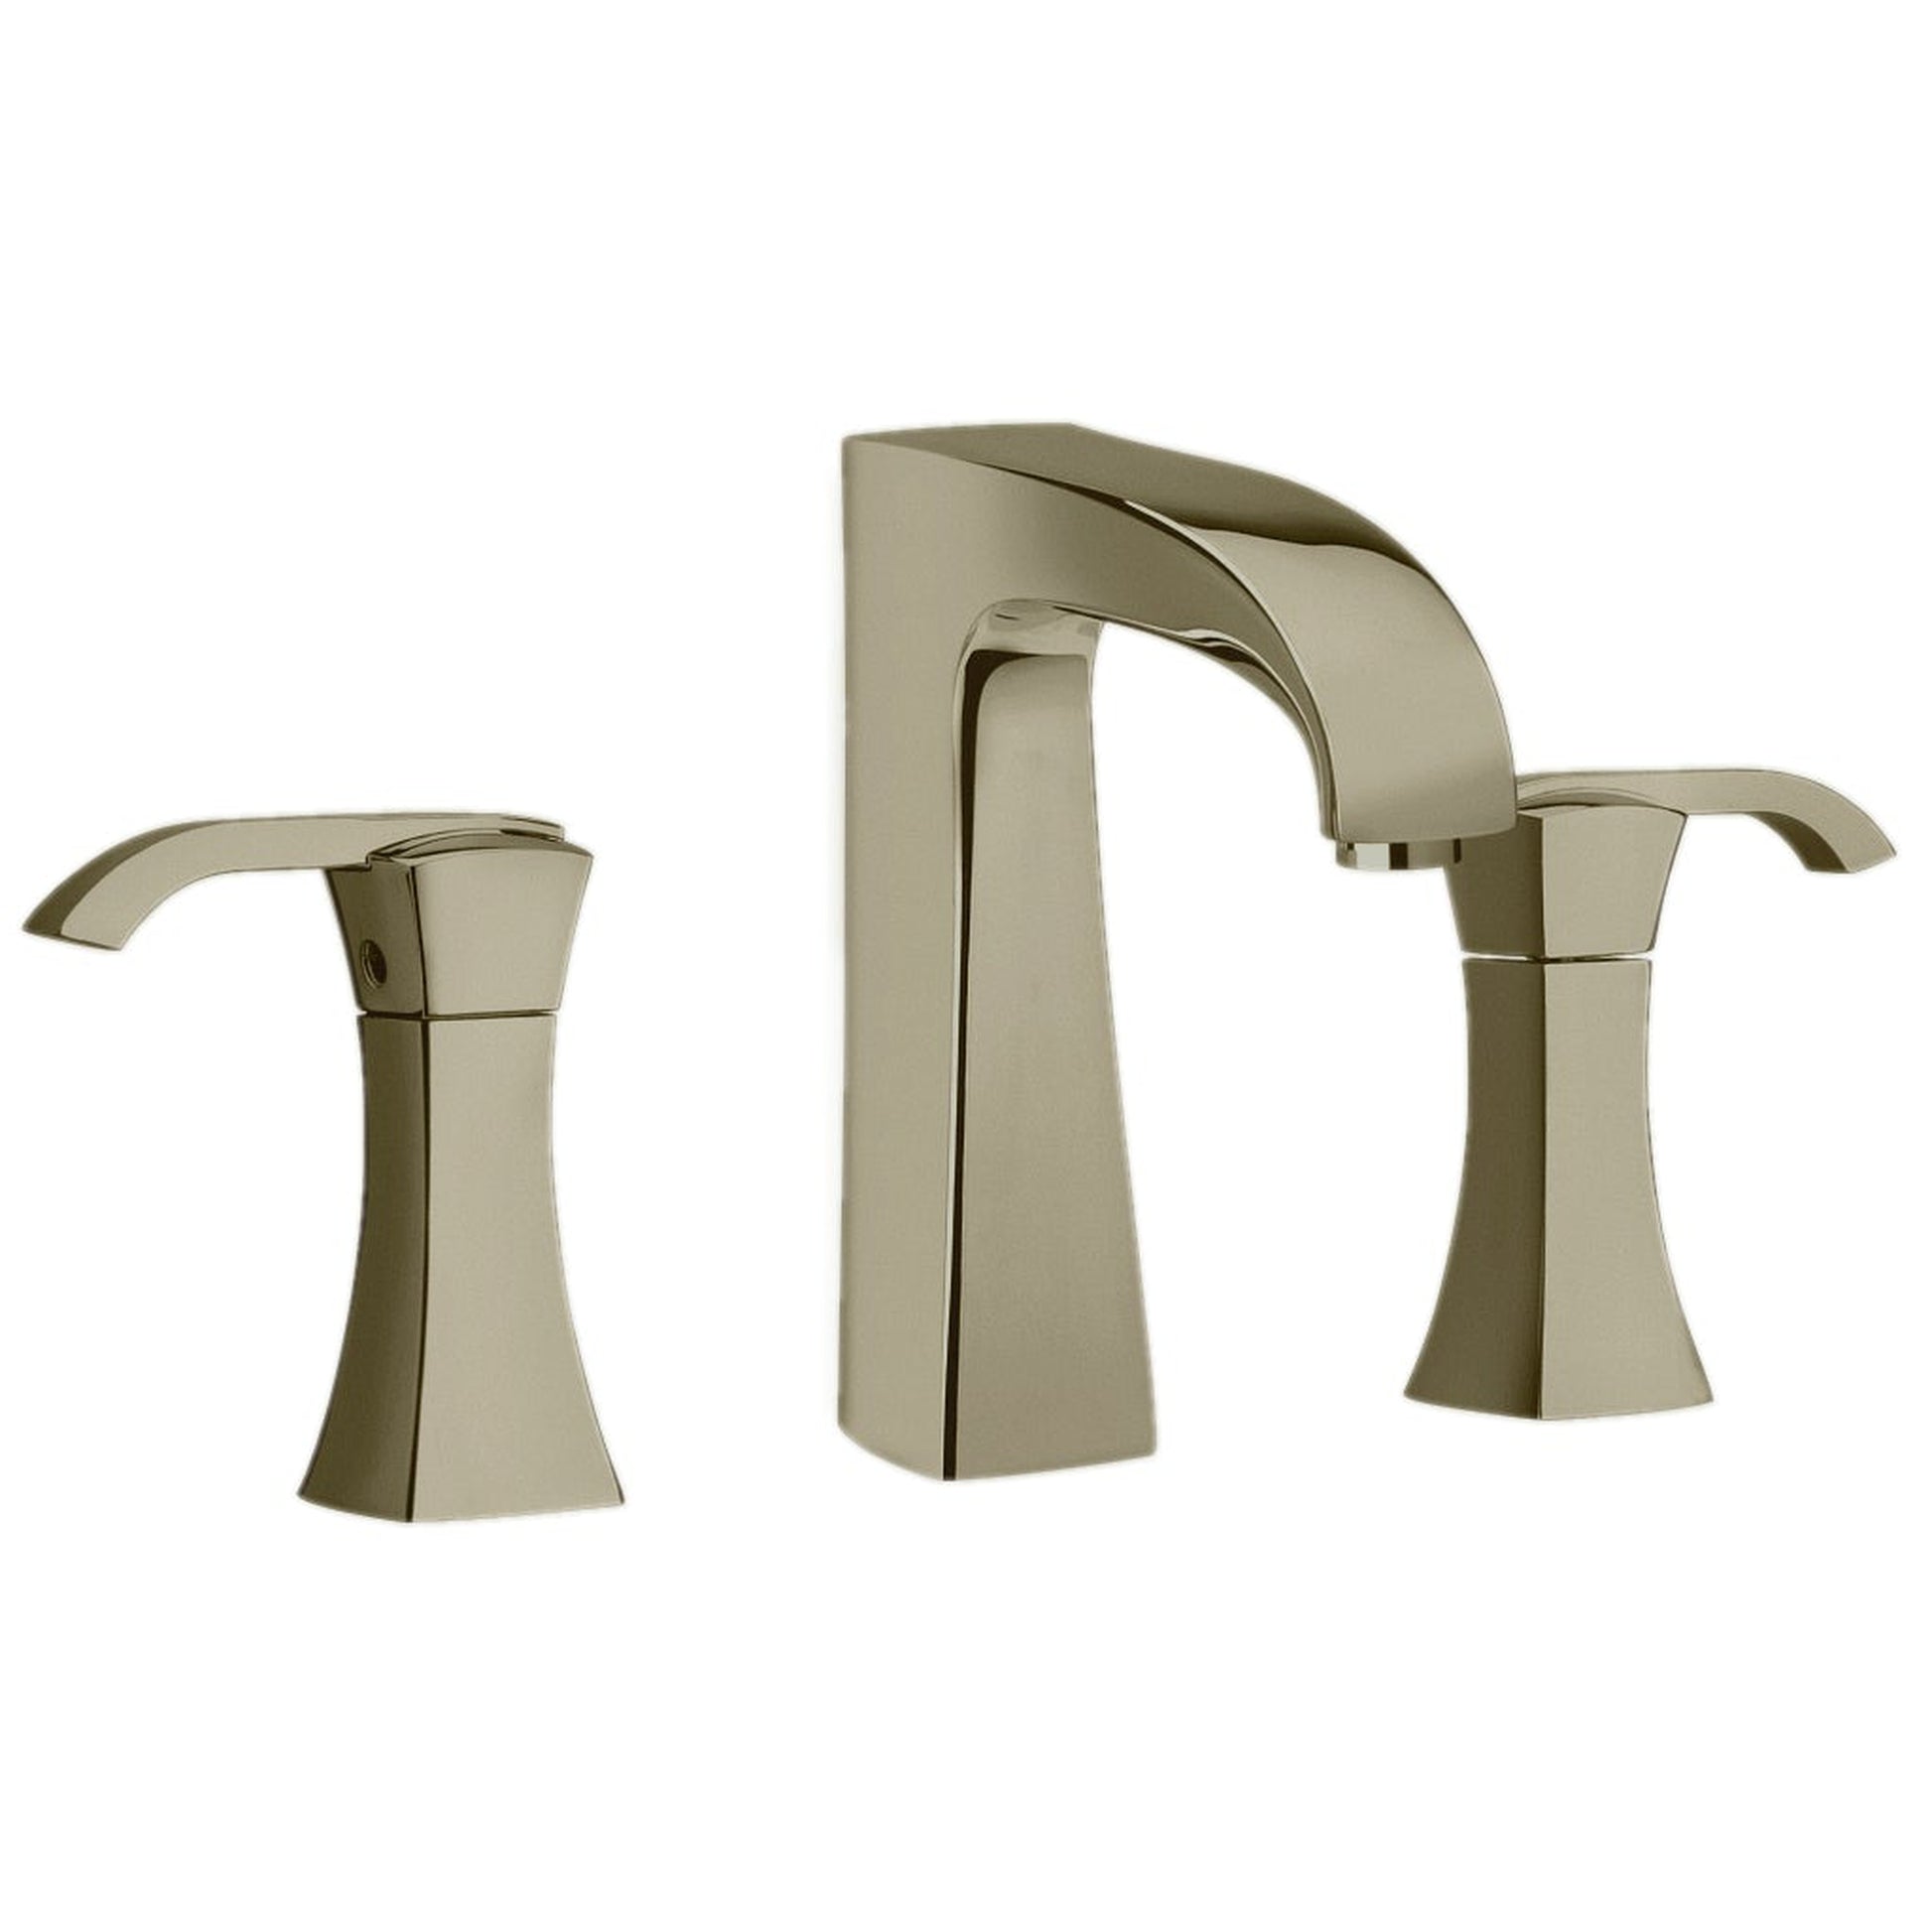 LaToscana Lady Brushed Nickel Widespread Lavatory Faucet With Lever Handles